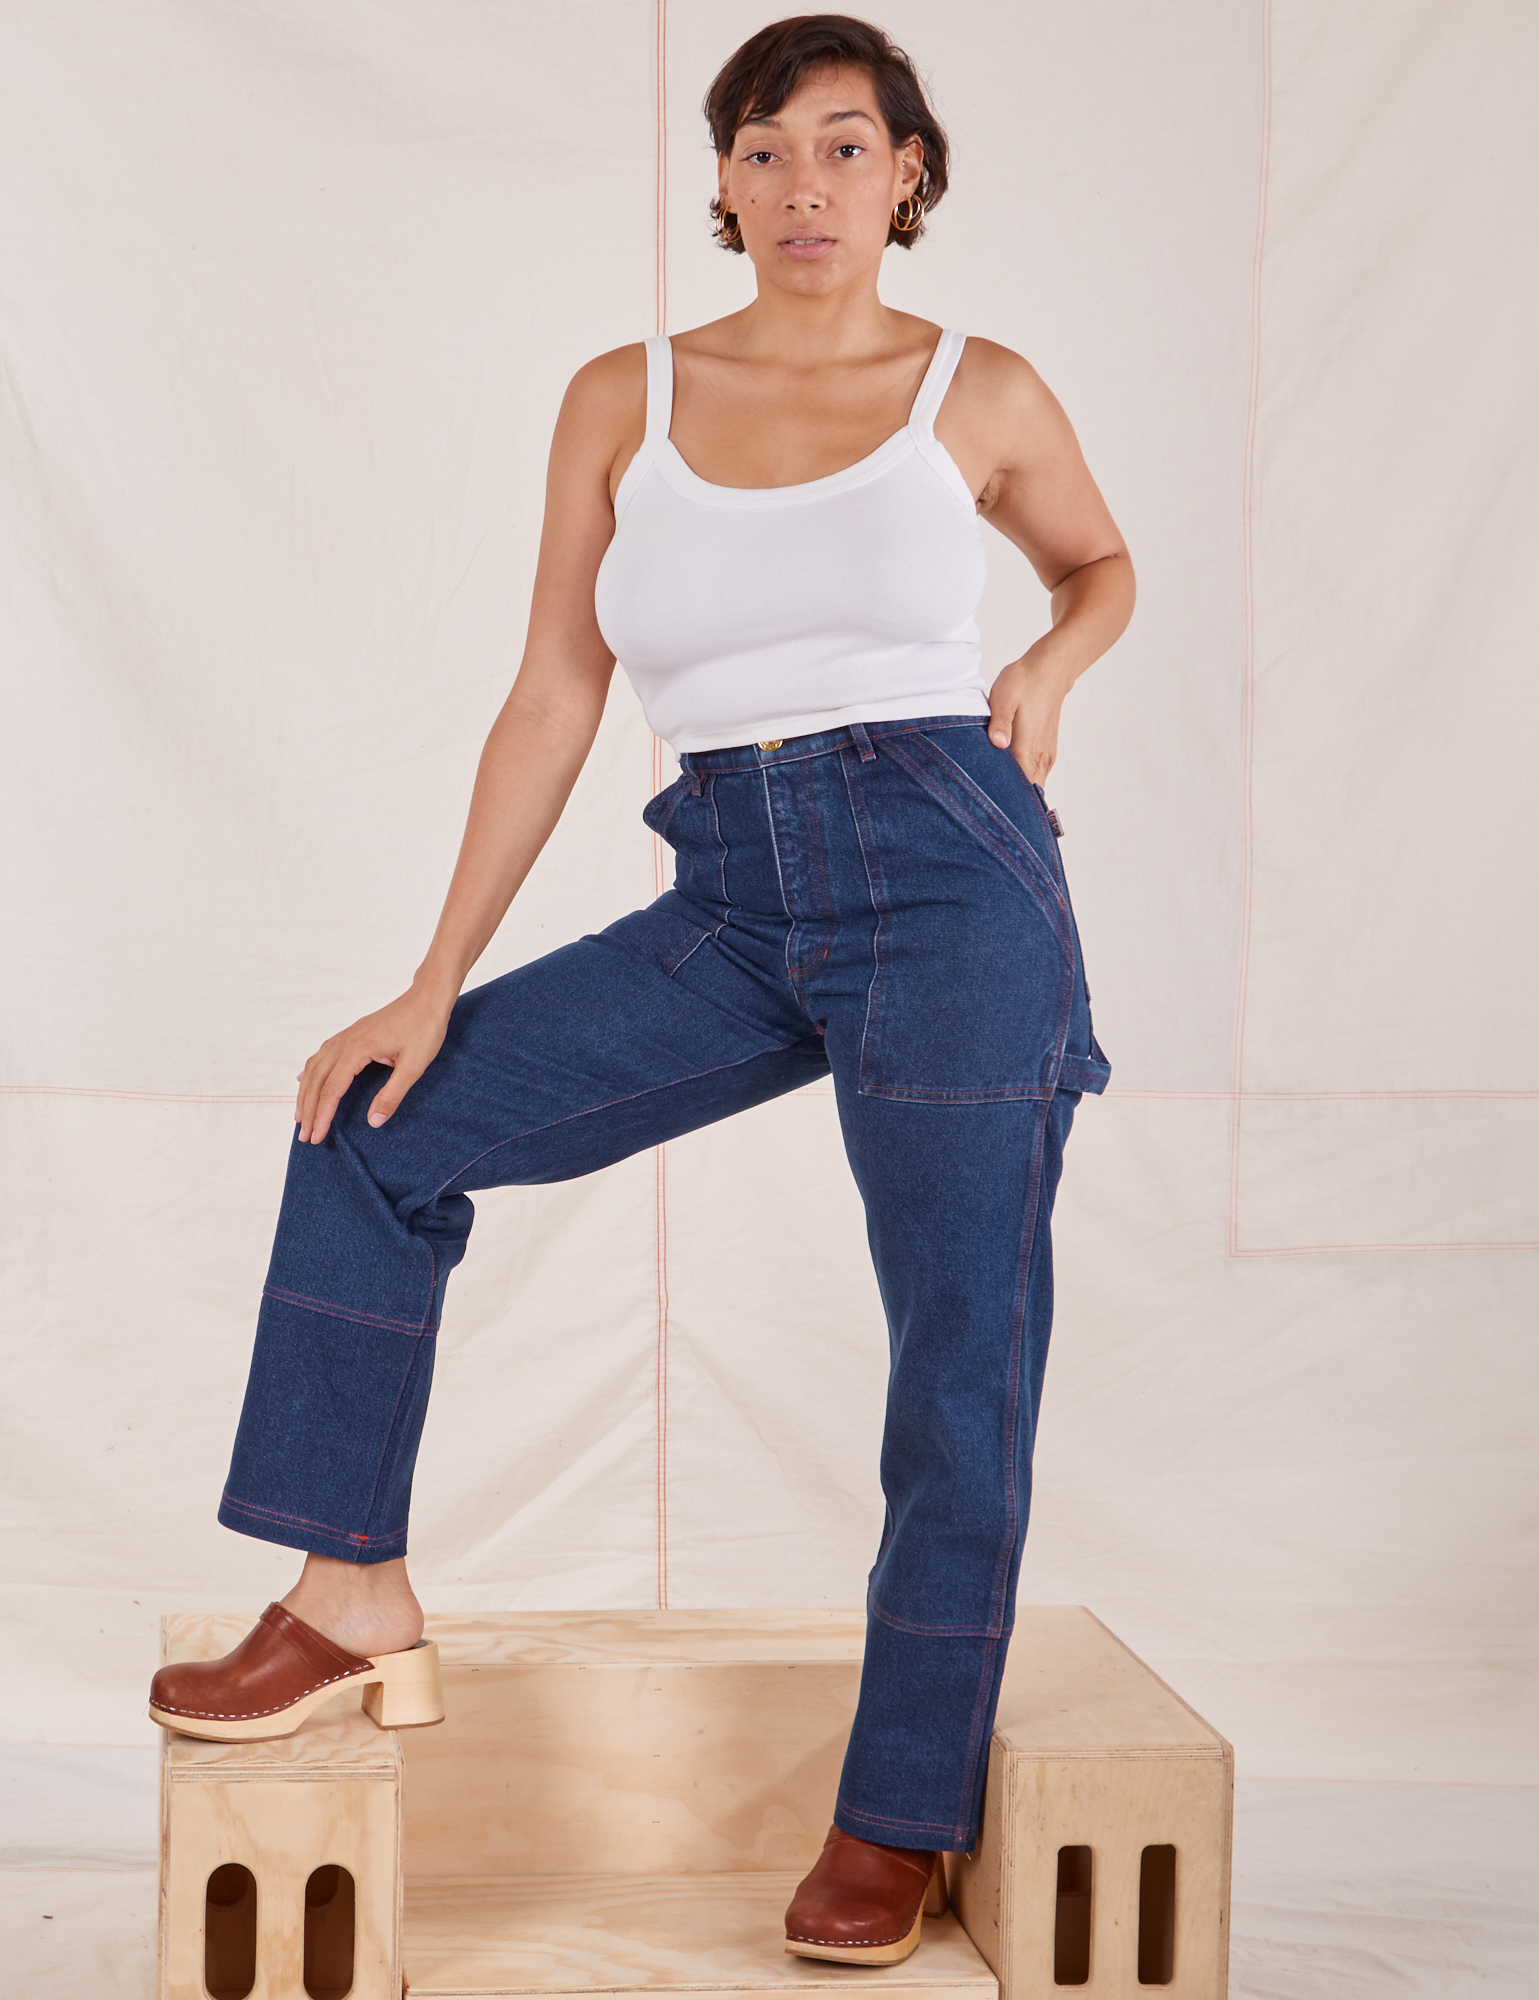 Tiara is 5&#39;4&quot; and wearing S Carpenter Jeans in Dark Wash paired with Cropped Cami in vintage tee off-white